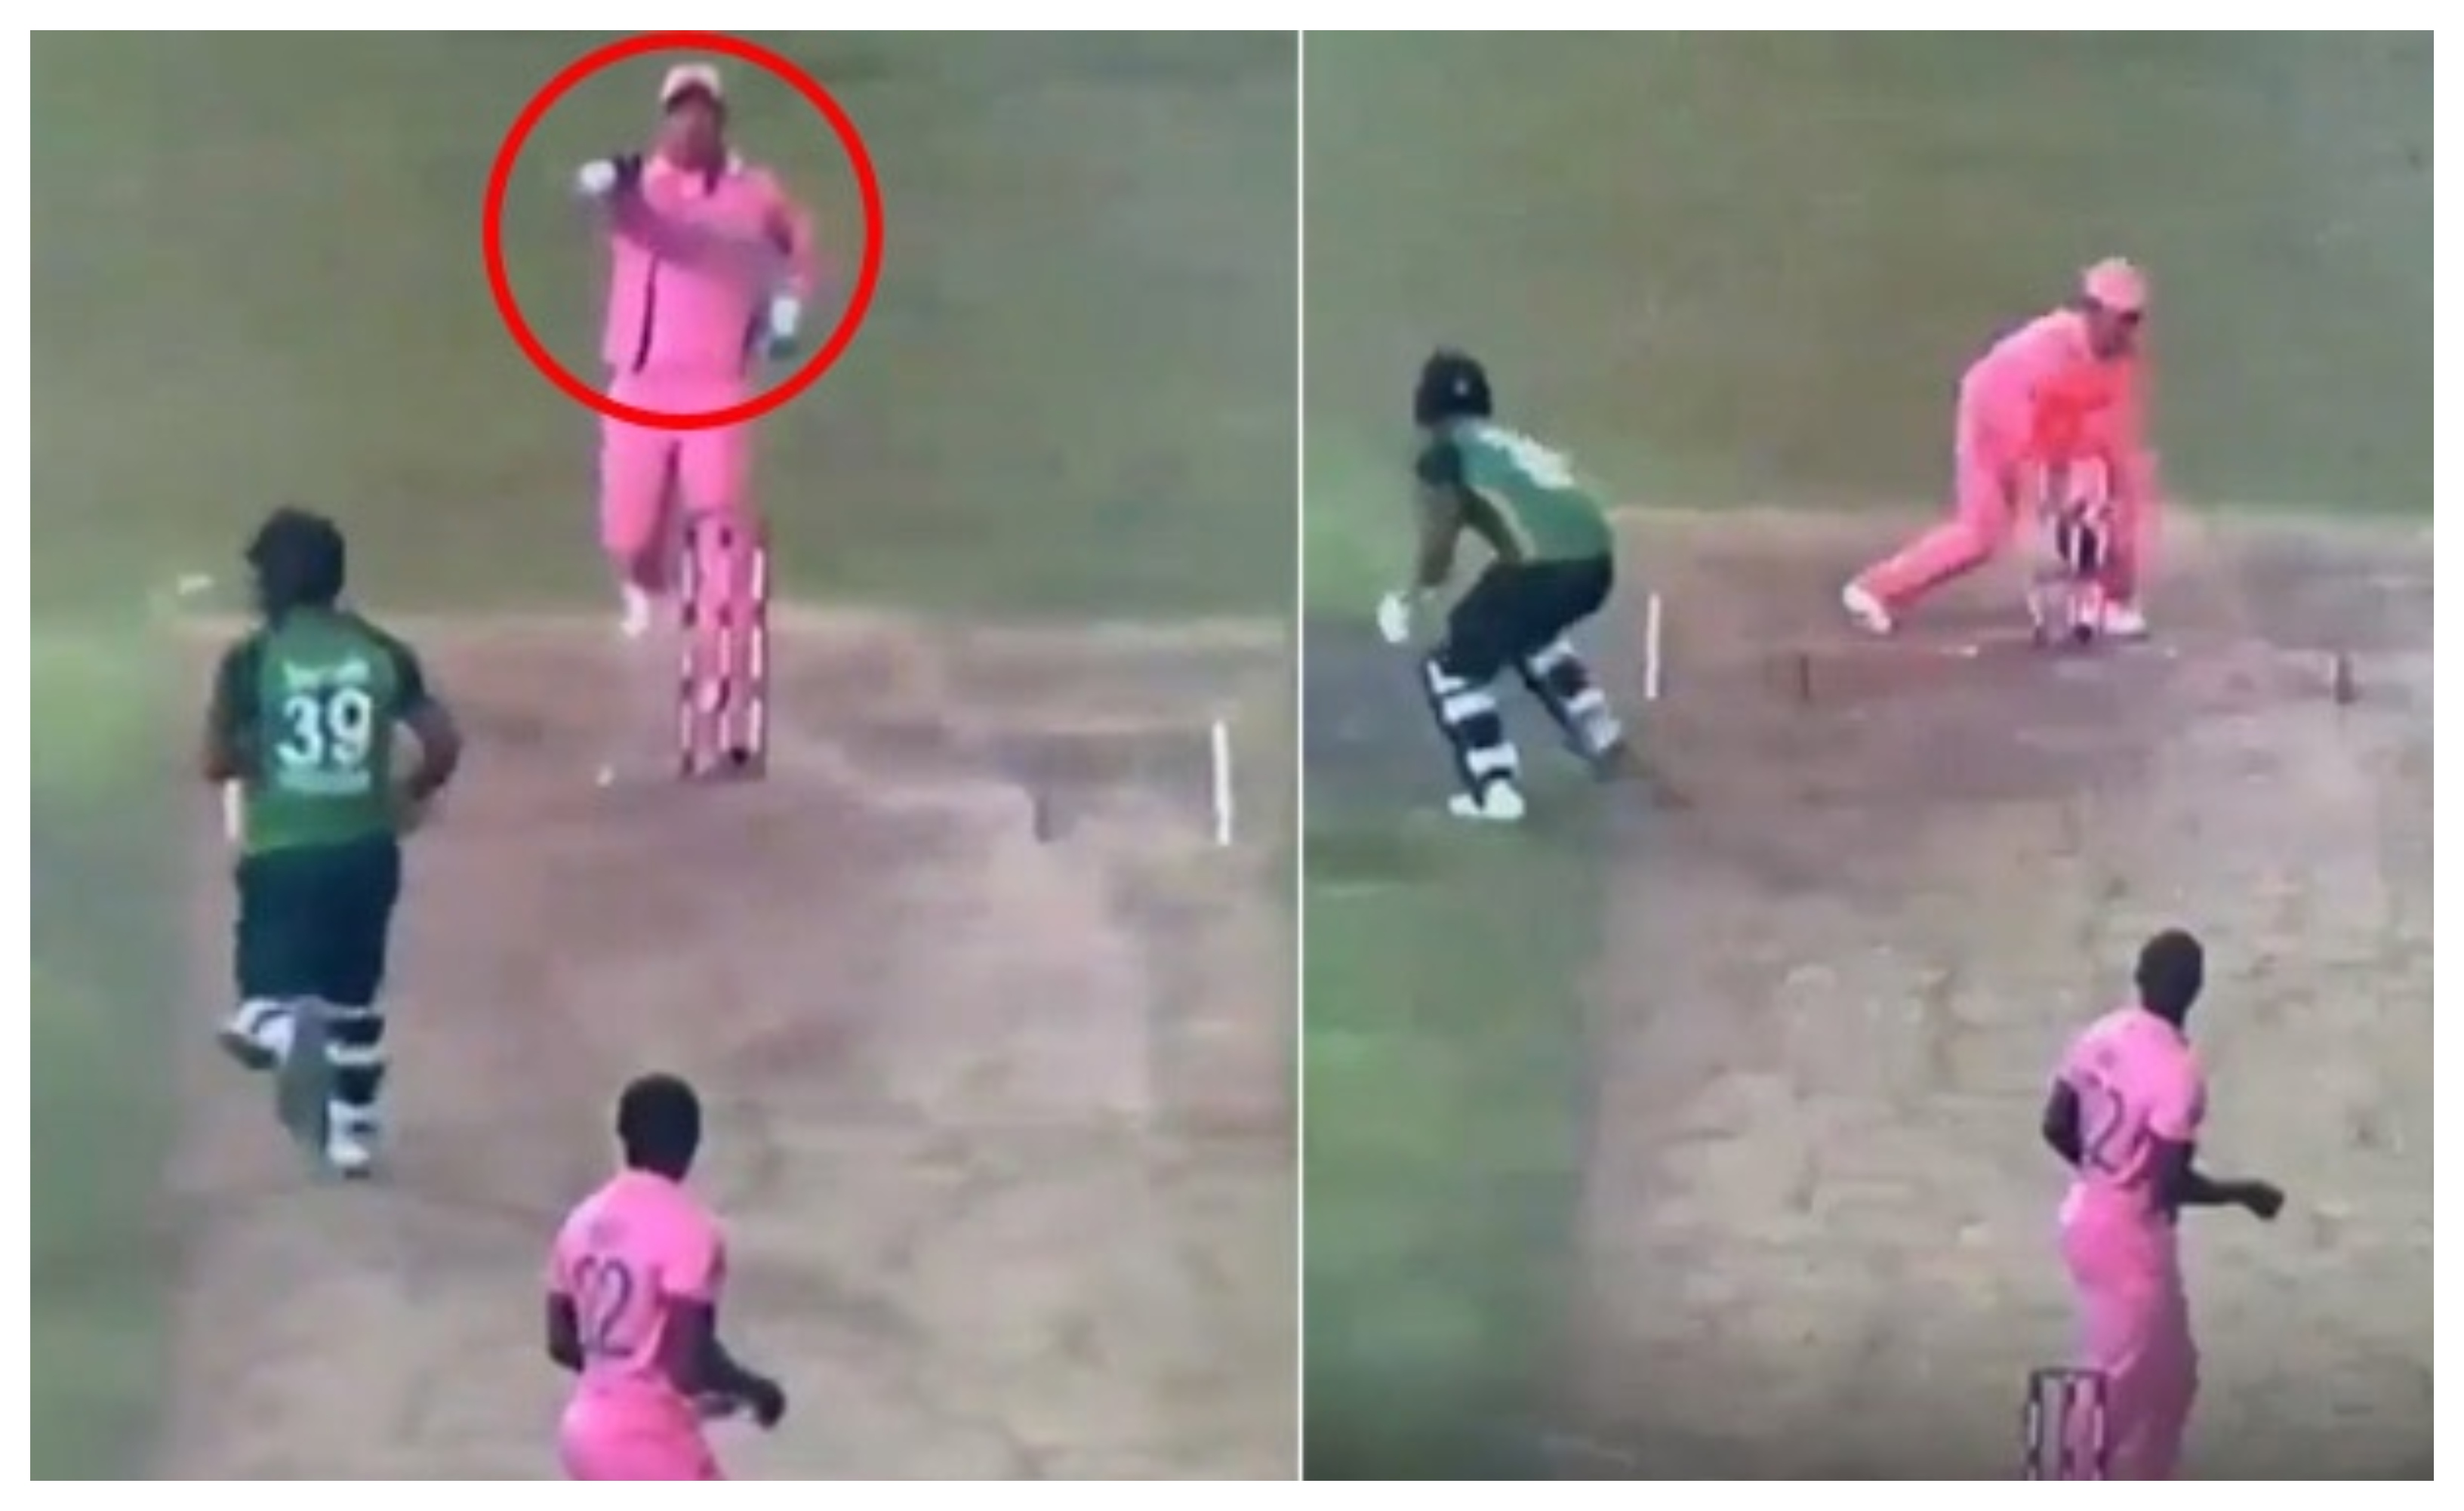 Quinton de Kock's act resulted in the wicket of Fakhar Zaman | Screengrab